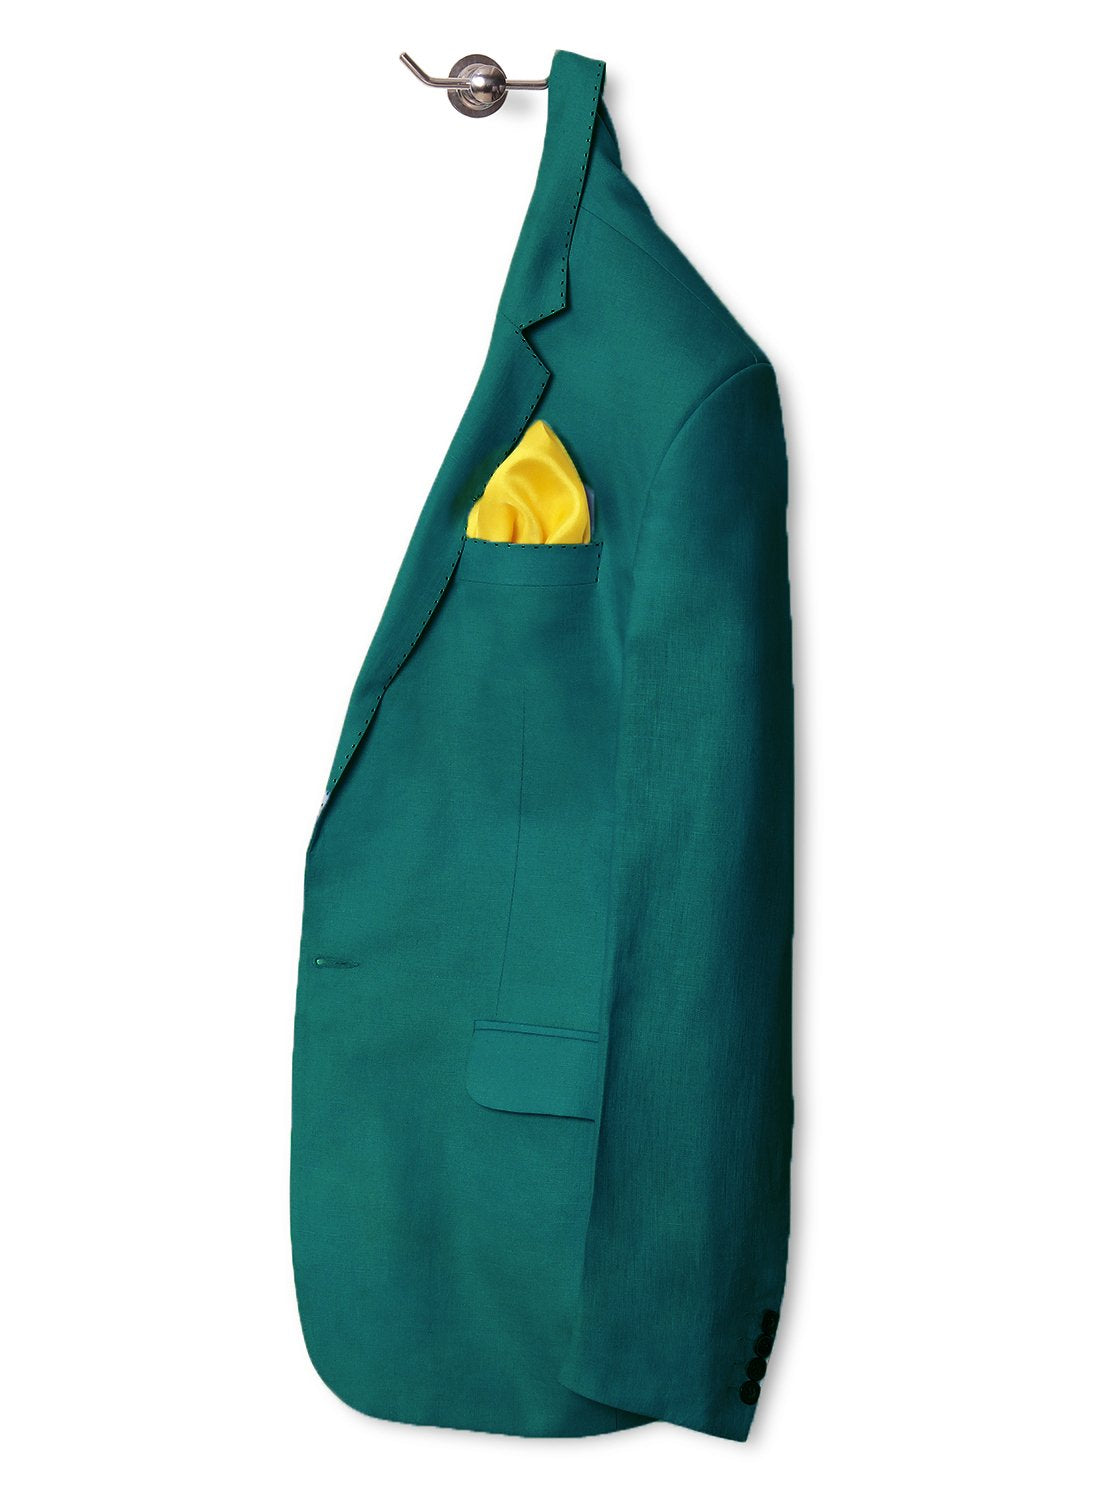 Chokore Sunshine Yellow Pocket Square, from the Solids Line